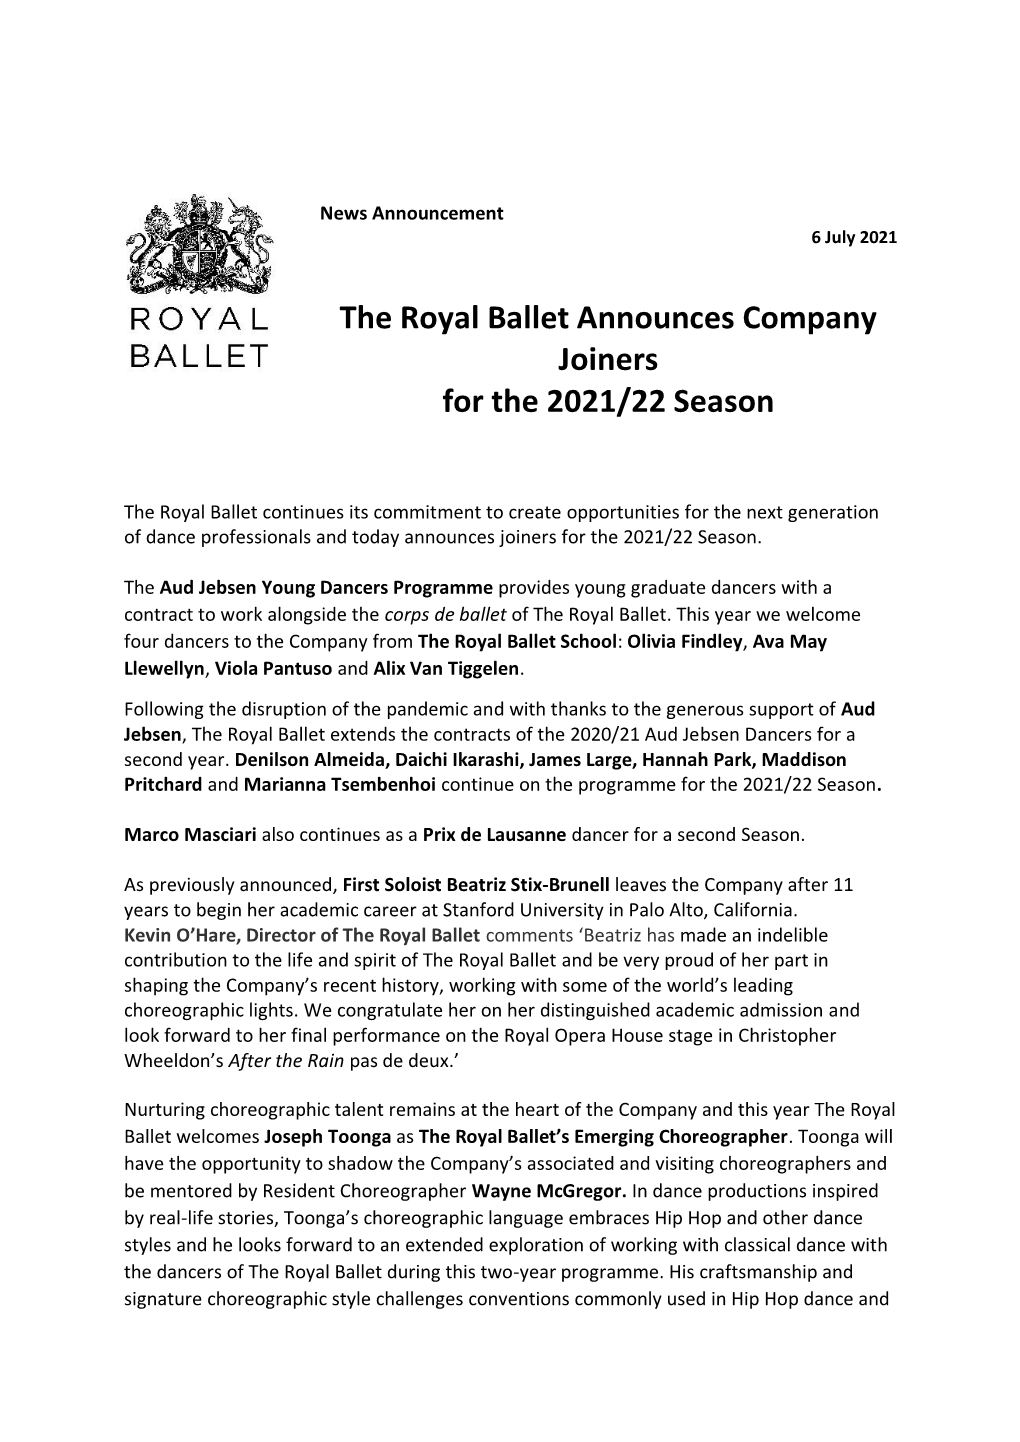 The Royal Ballet Announces Company Joiners for the 2021/22 Season